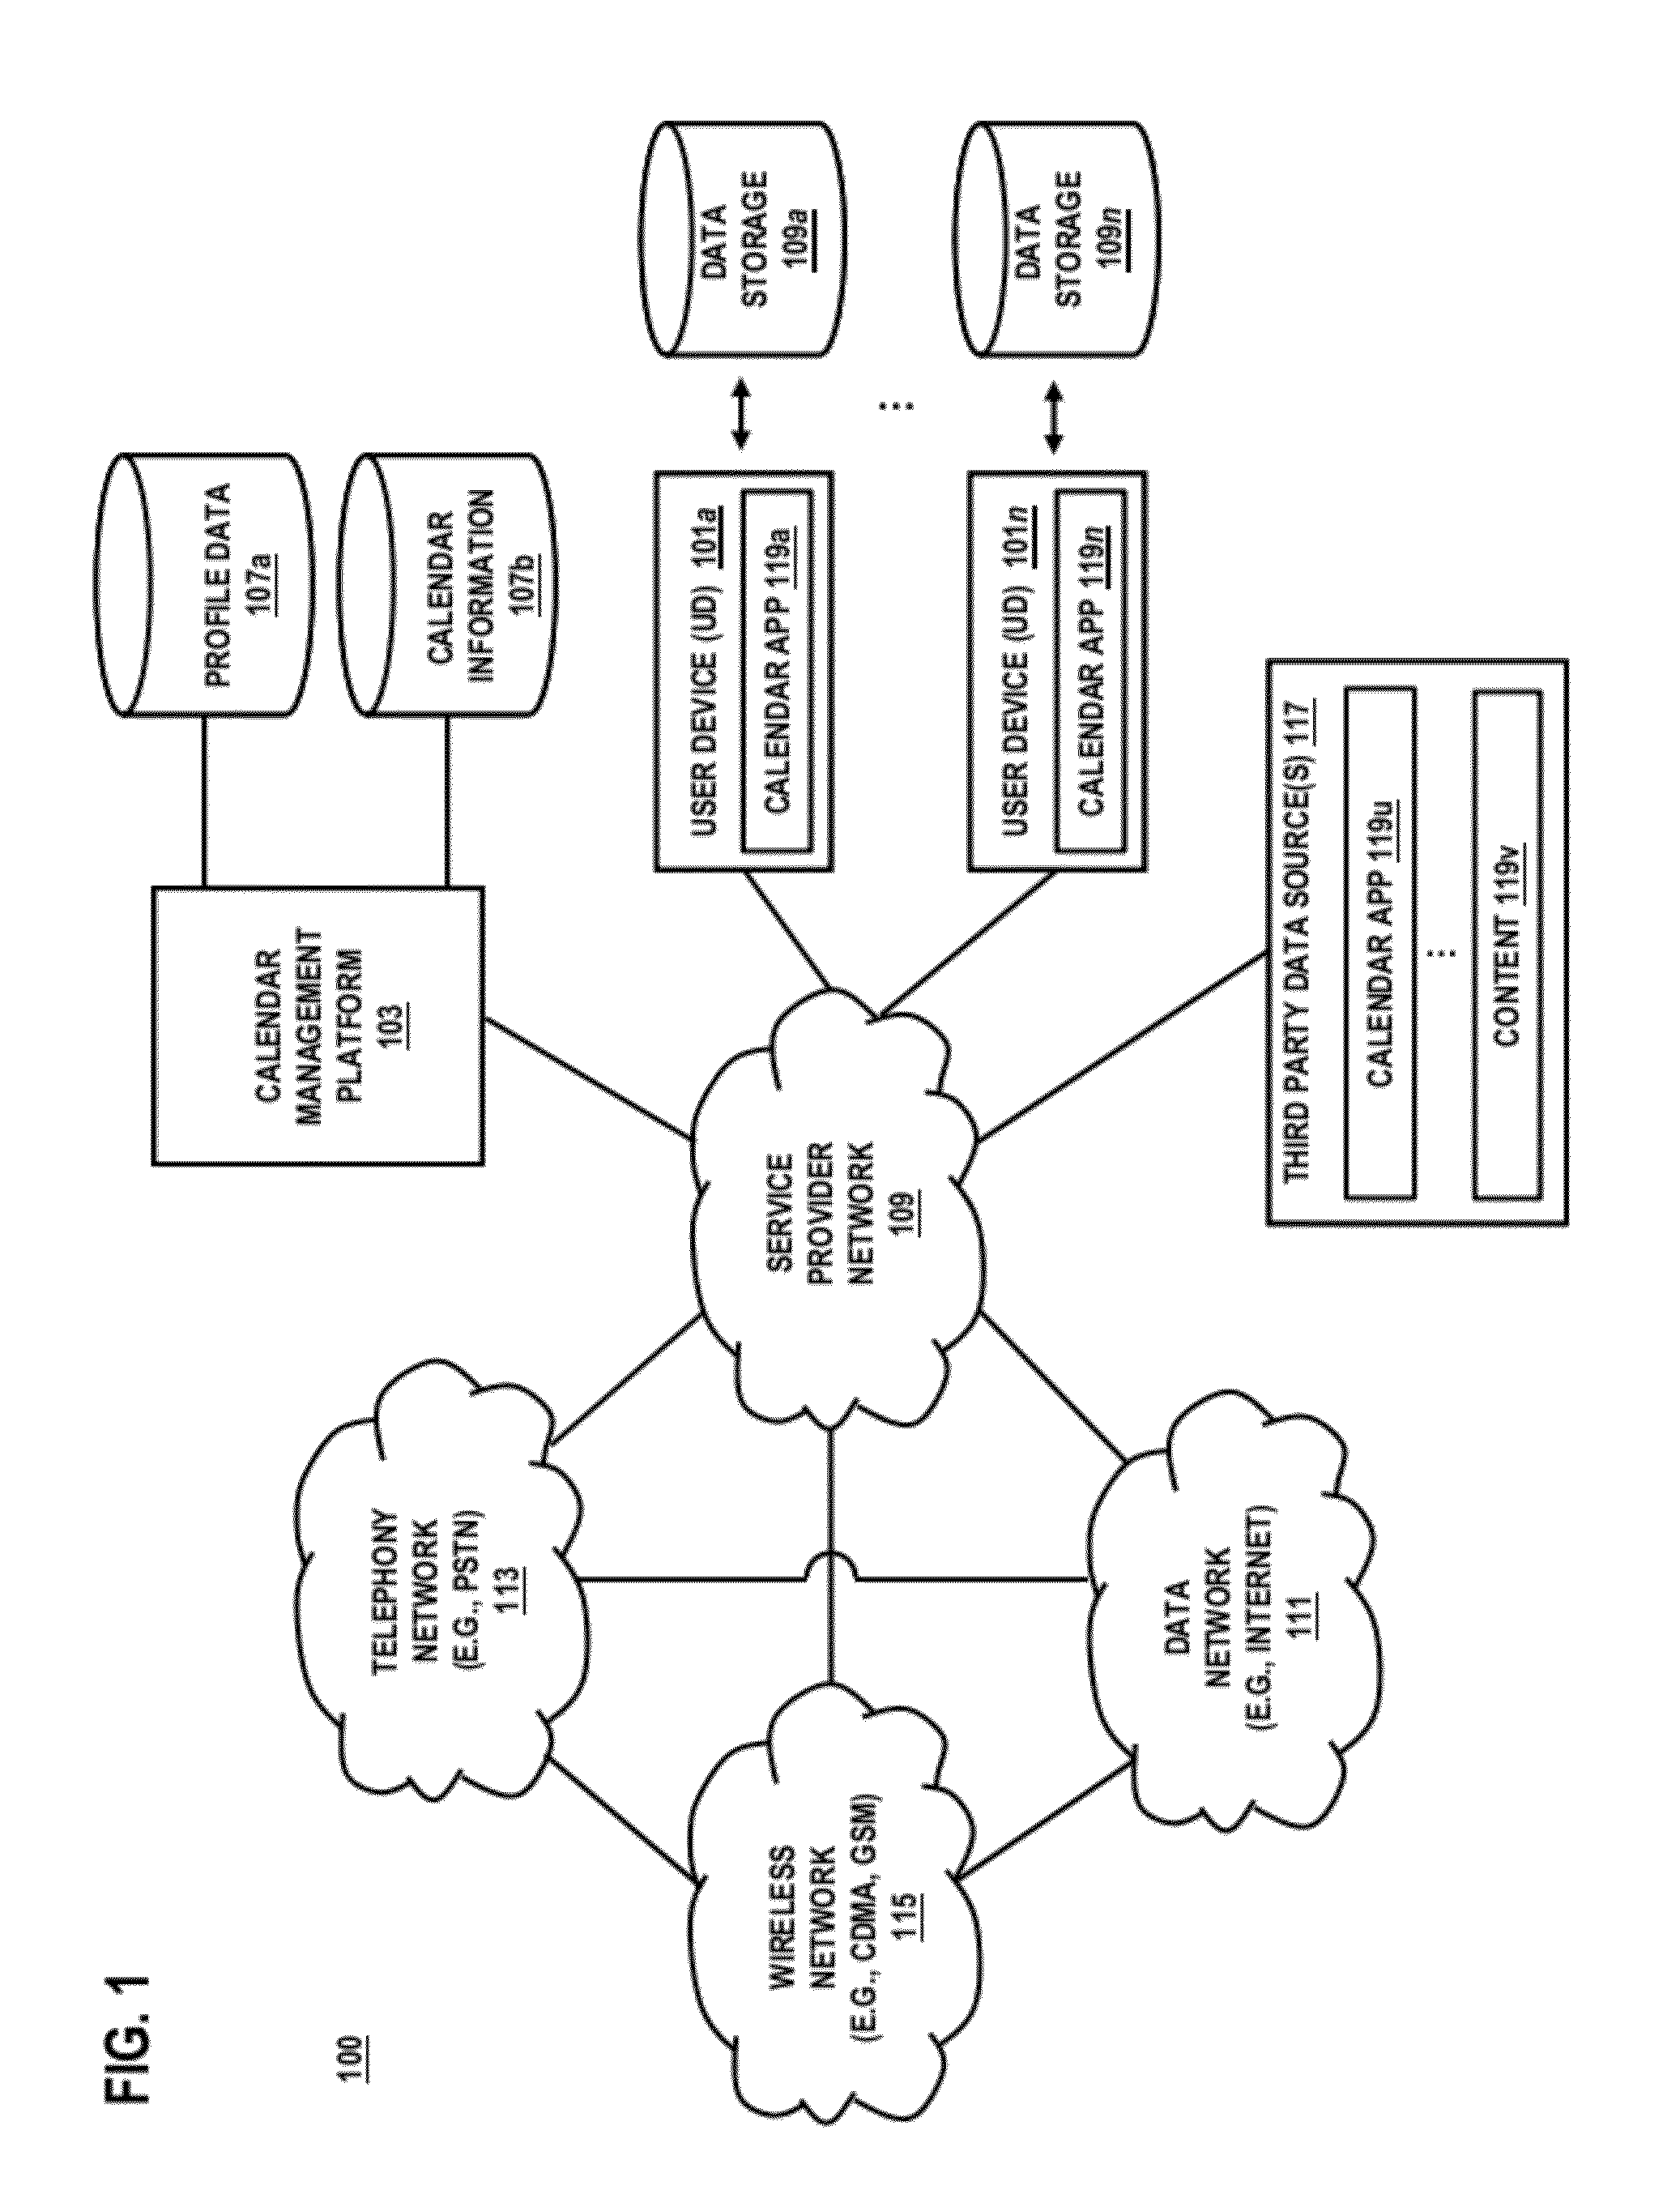 Method and apparatus for group coordination of calendar events